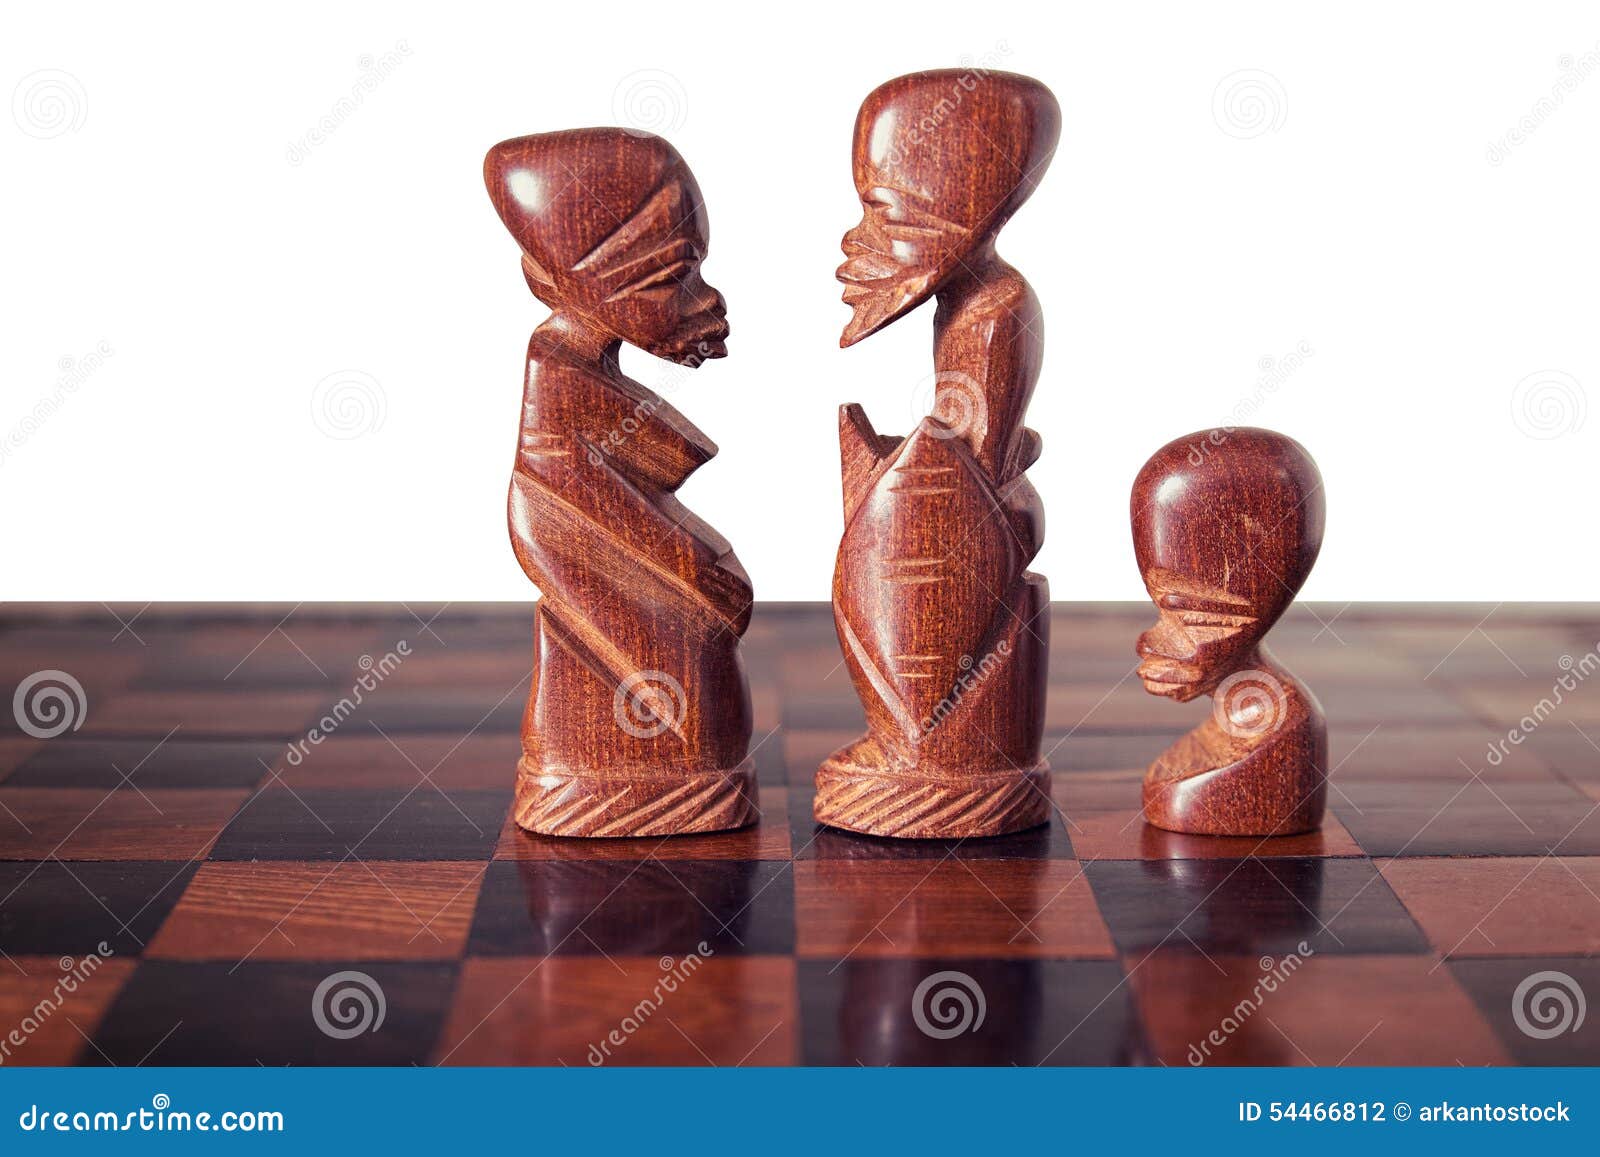 family with husband , wife and a son, represented by three pieces of wooden chess, king, queen and pawn , facing each other.